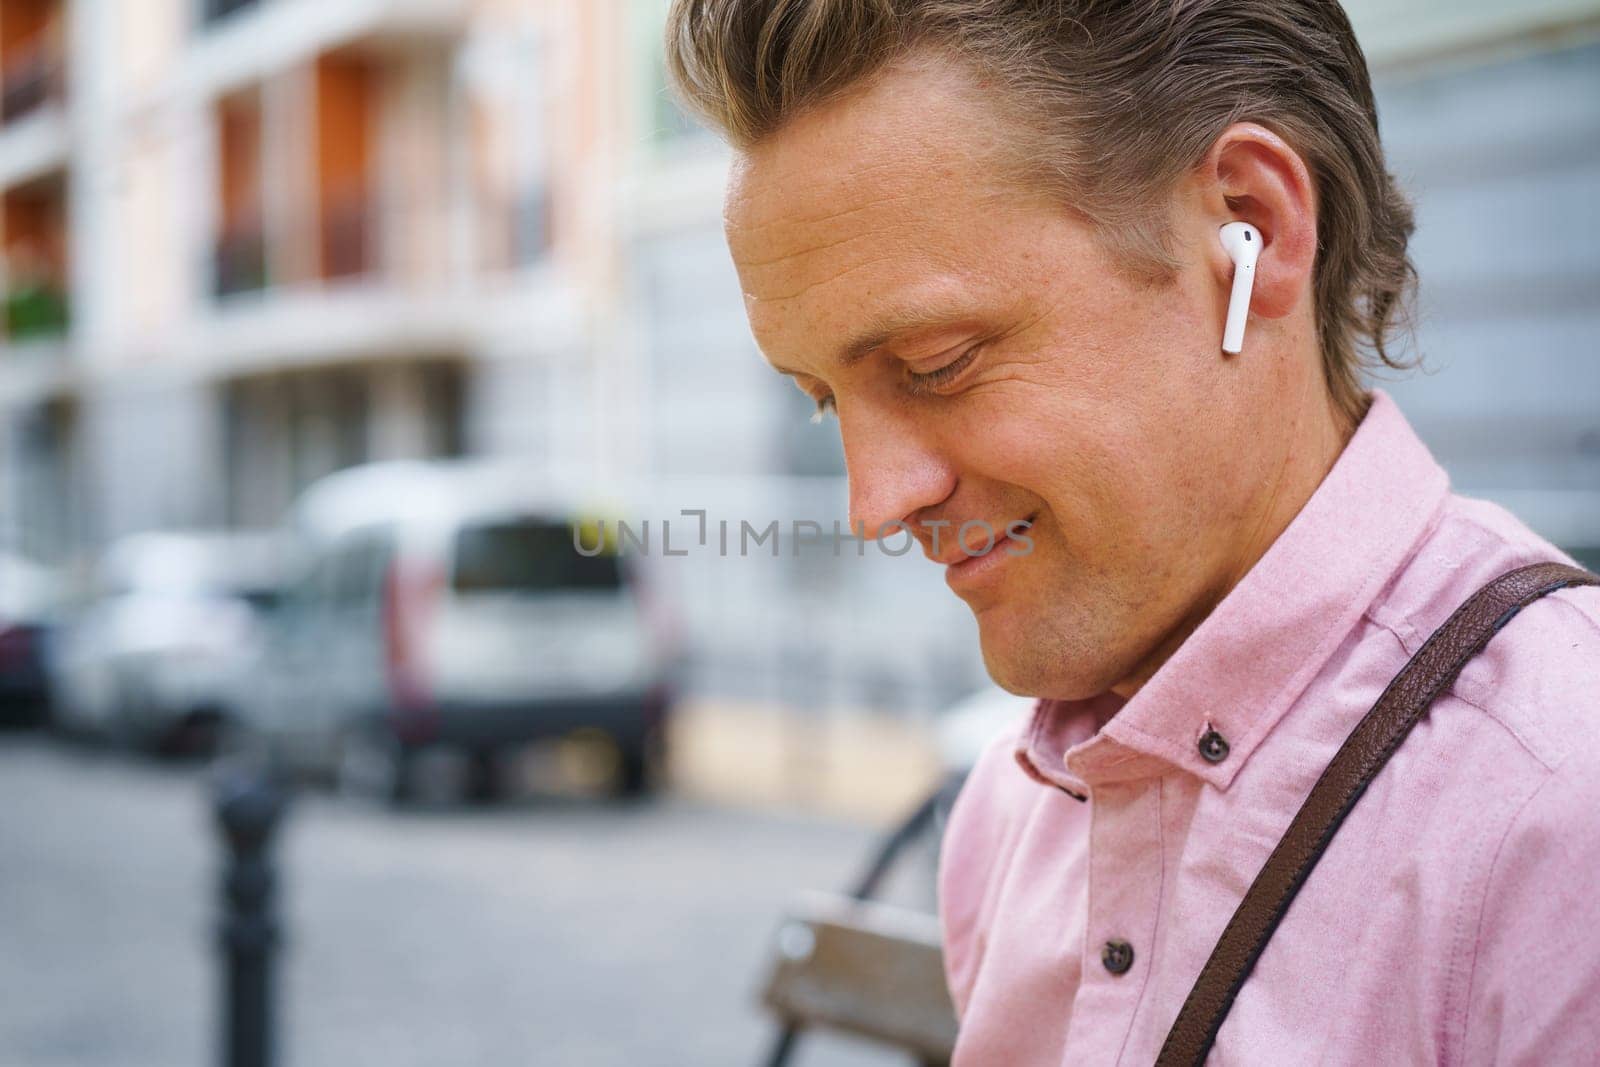 Moment of pure happiness as man with closed eyes enjoys listening to music on bench in bustling urban city. He fully immersed in music, finding relaxation and contentment in melodies. . High quality photo